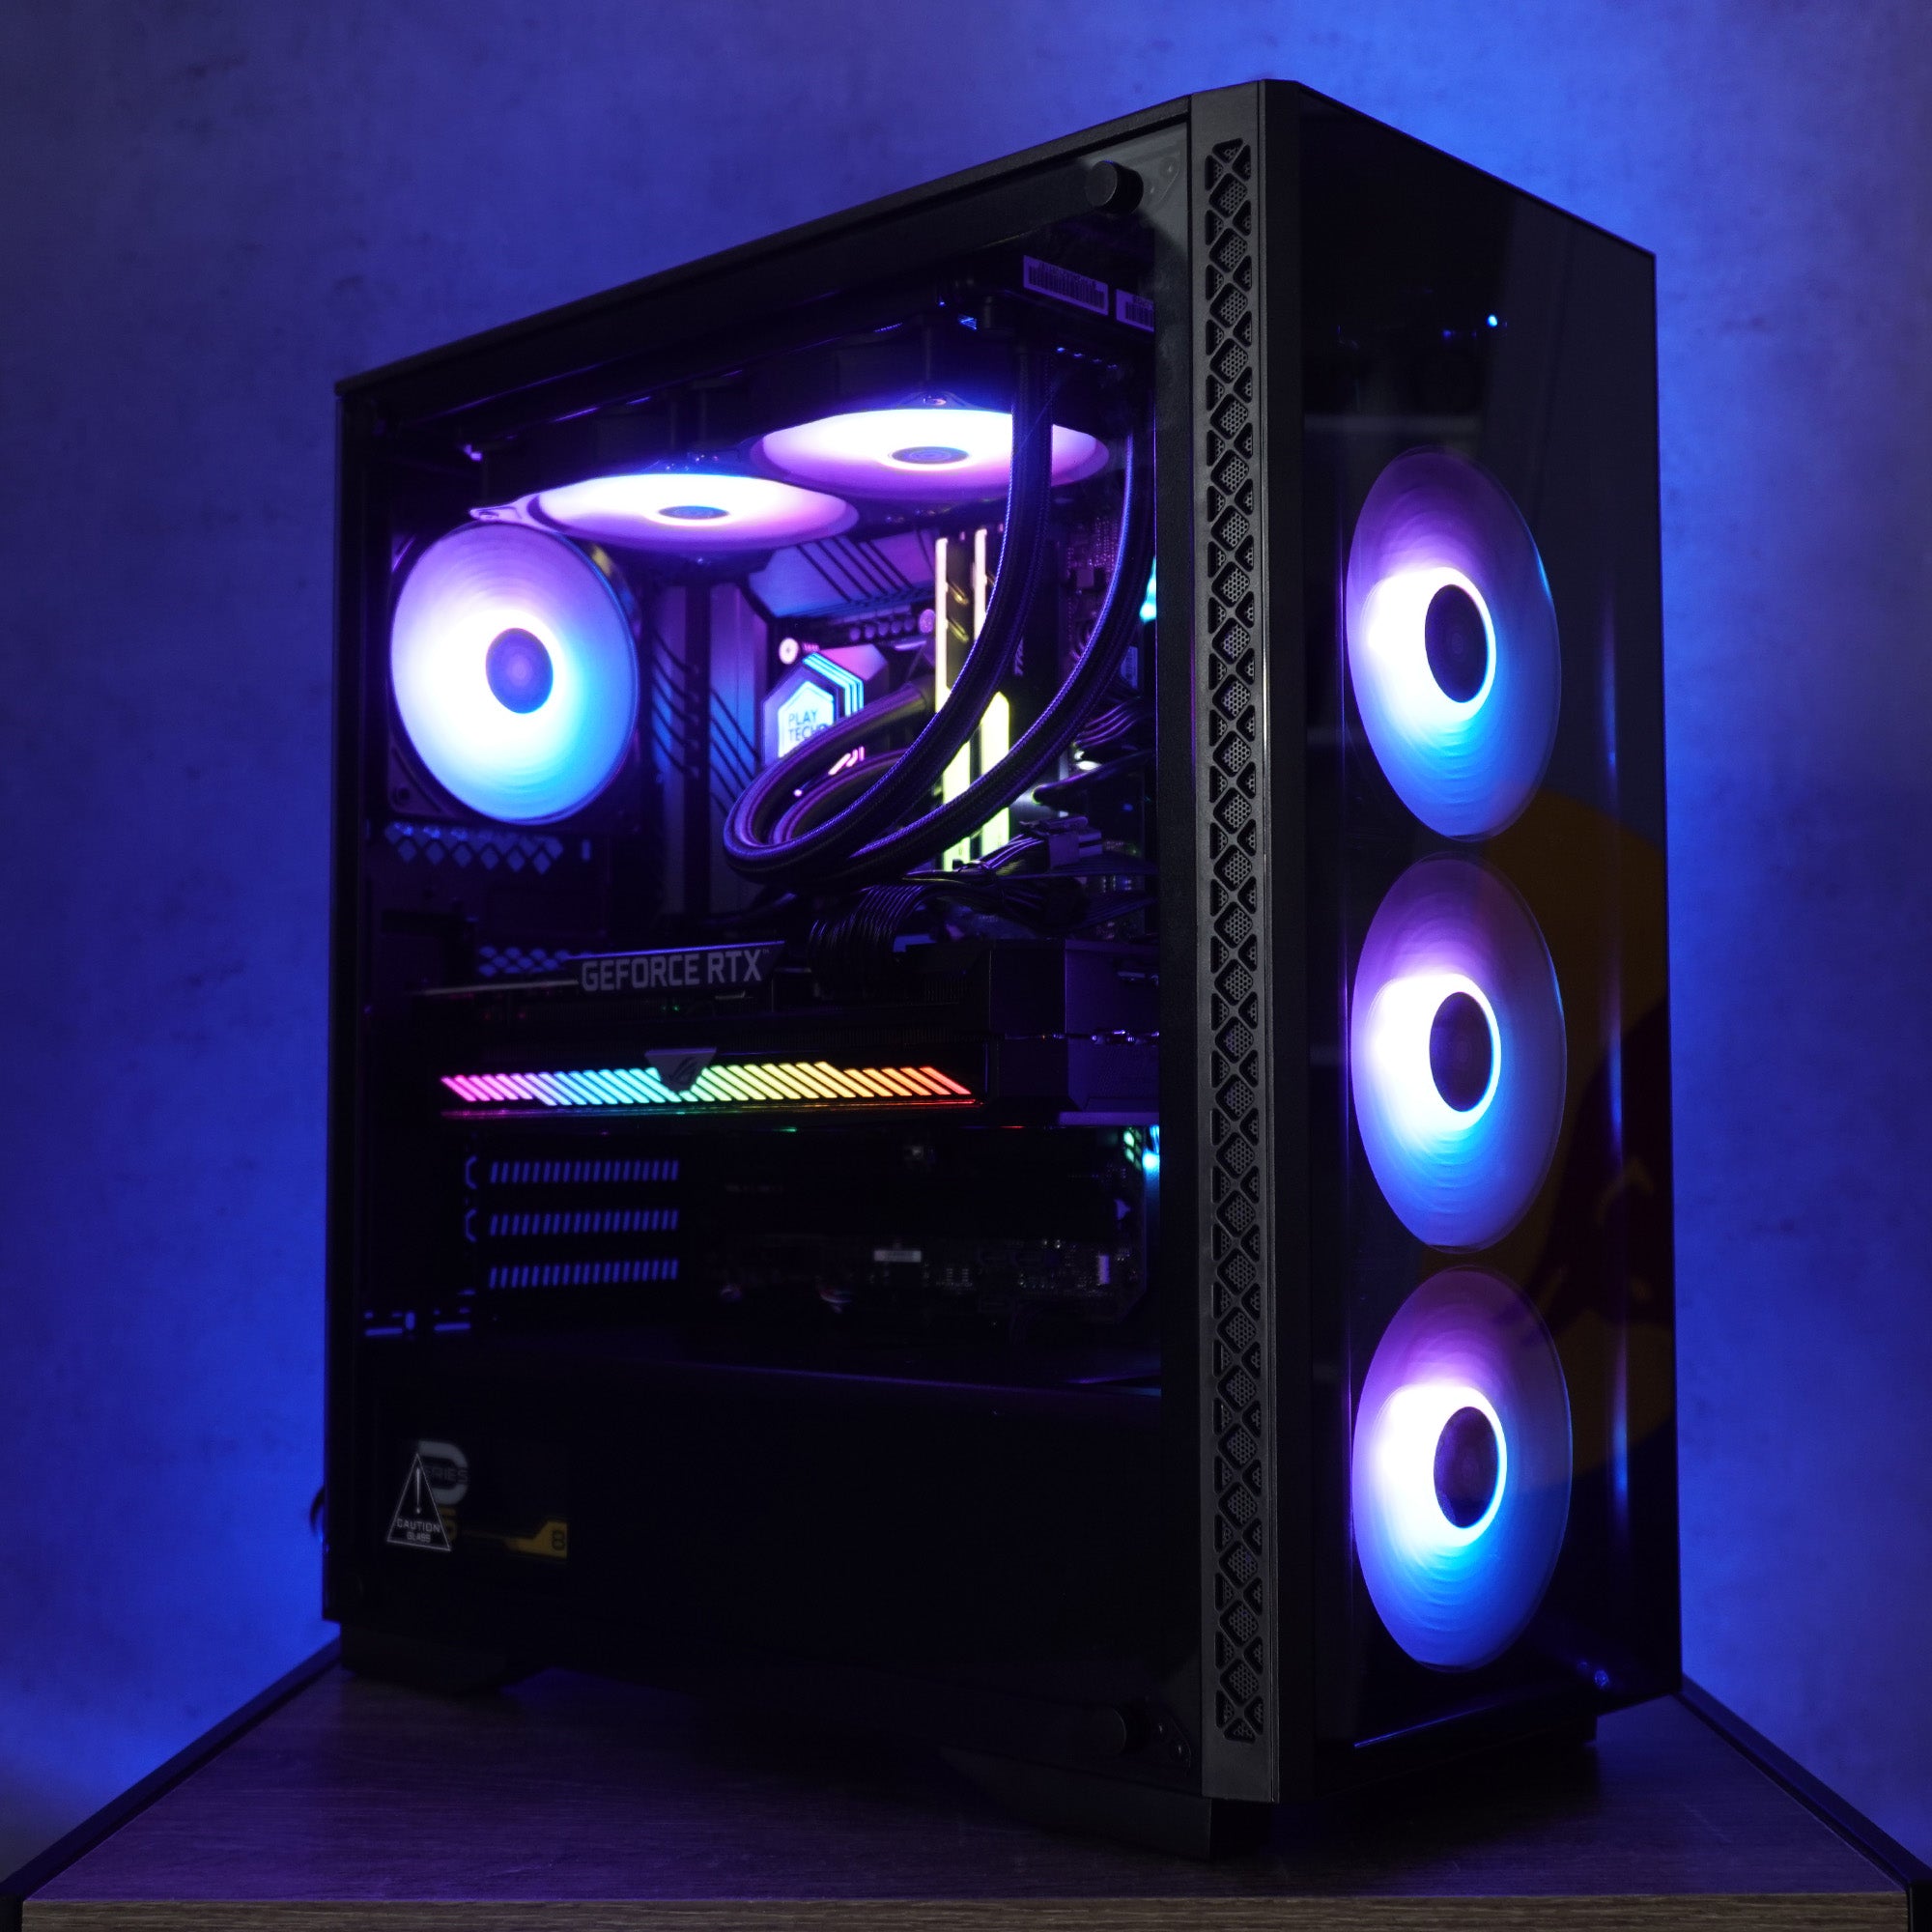 Shop for Prebuilt Gaming PC Systems in NZ | Playtech